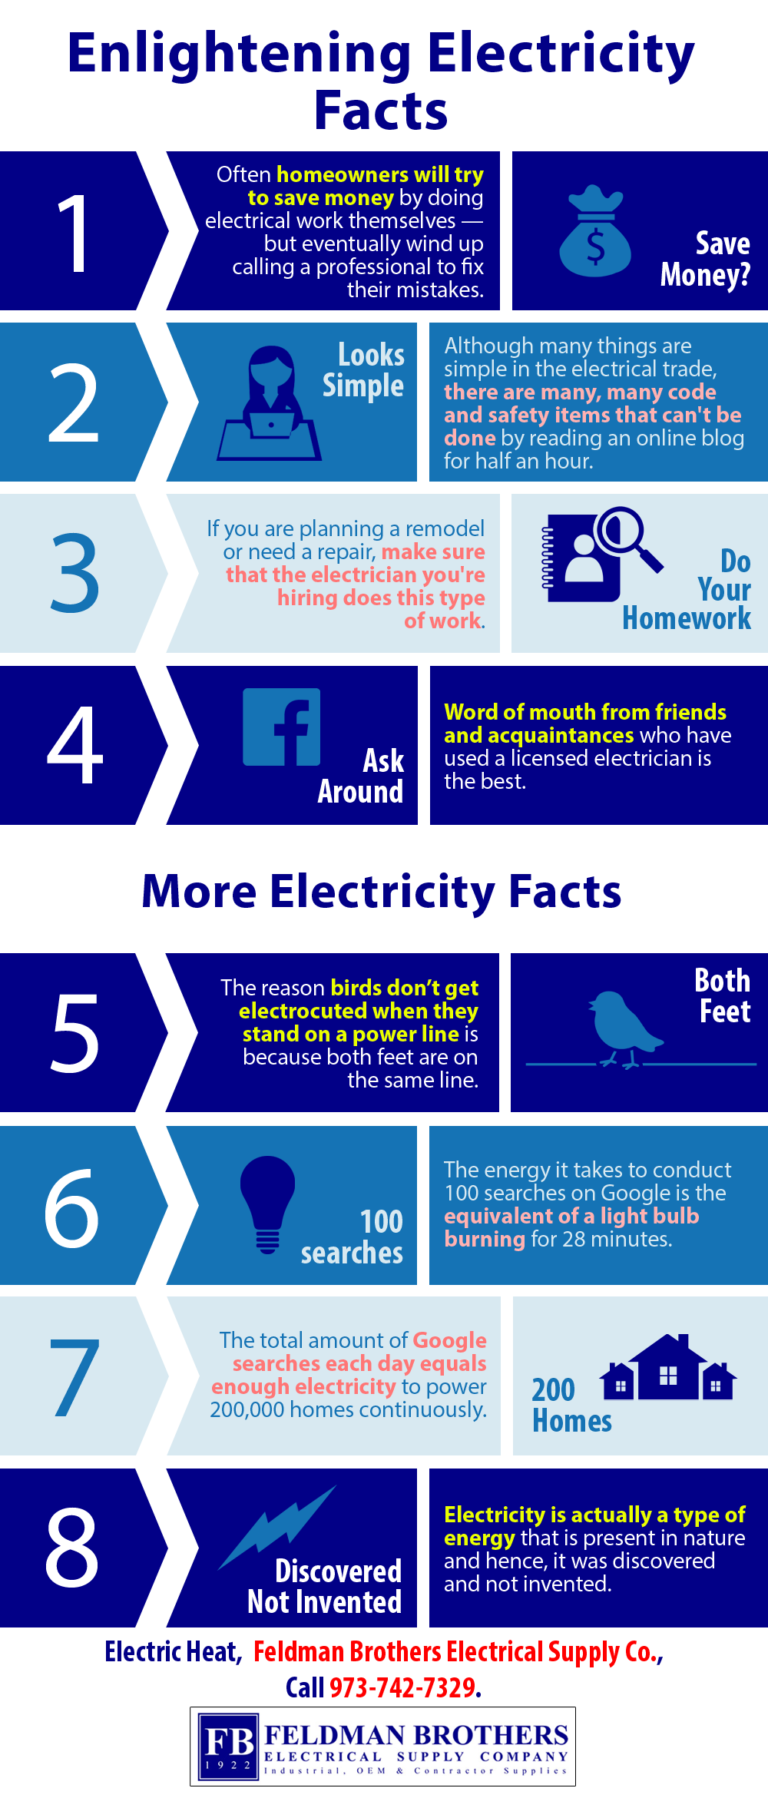 Enlightening Electricity Facts | Shared Info Graphics